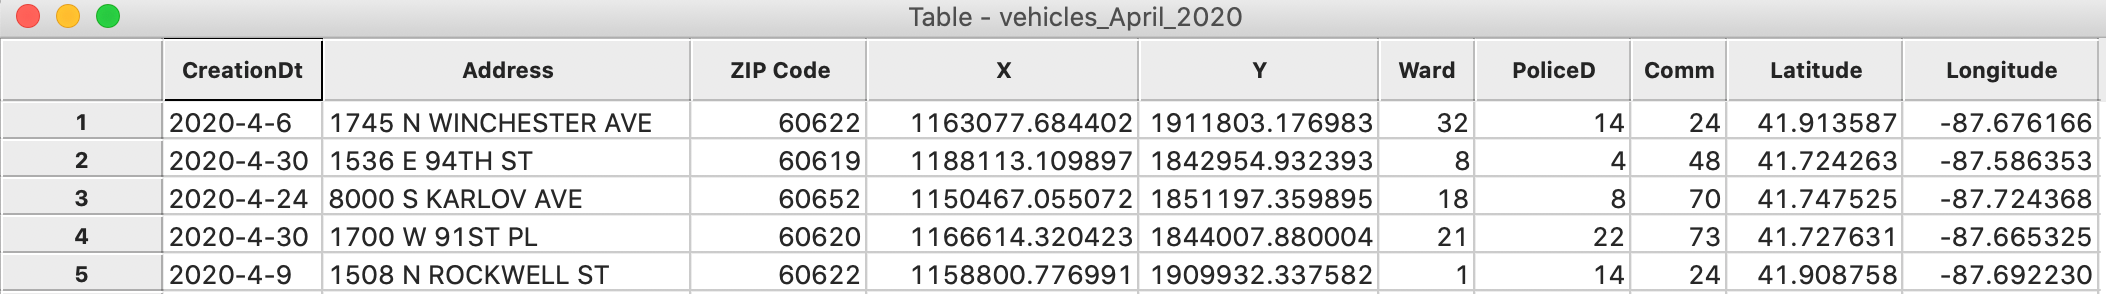 New vehicles data table